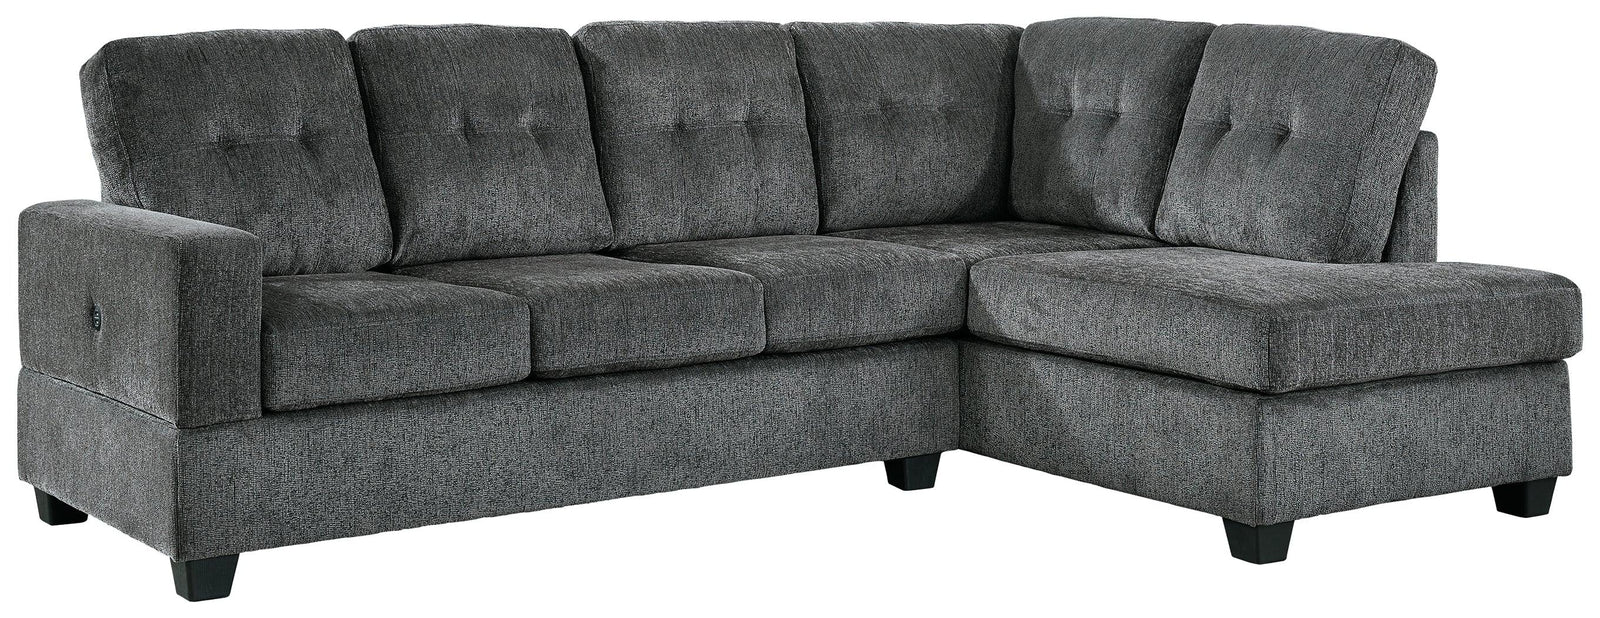 Kitler Smoke 2-Piece Sectional With Chaise - Ella Furniture